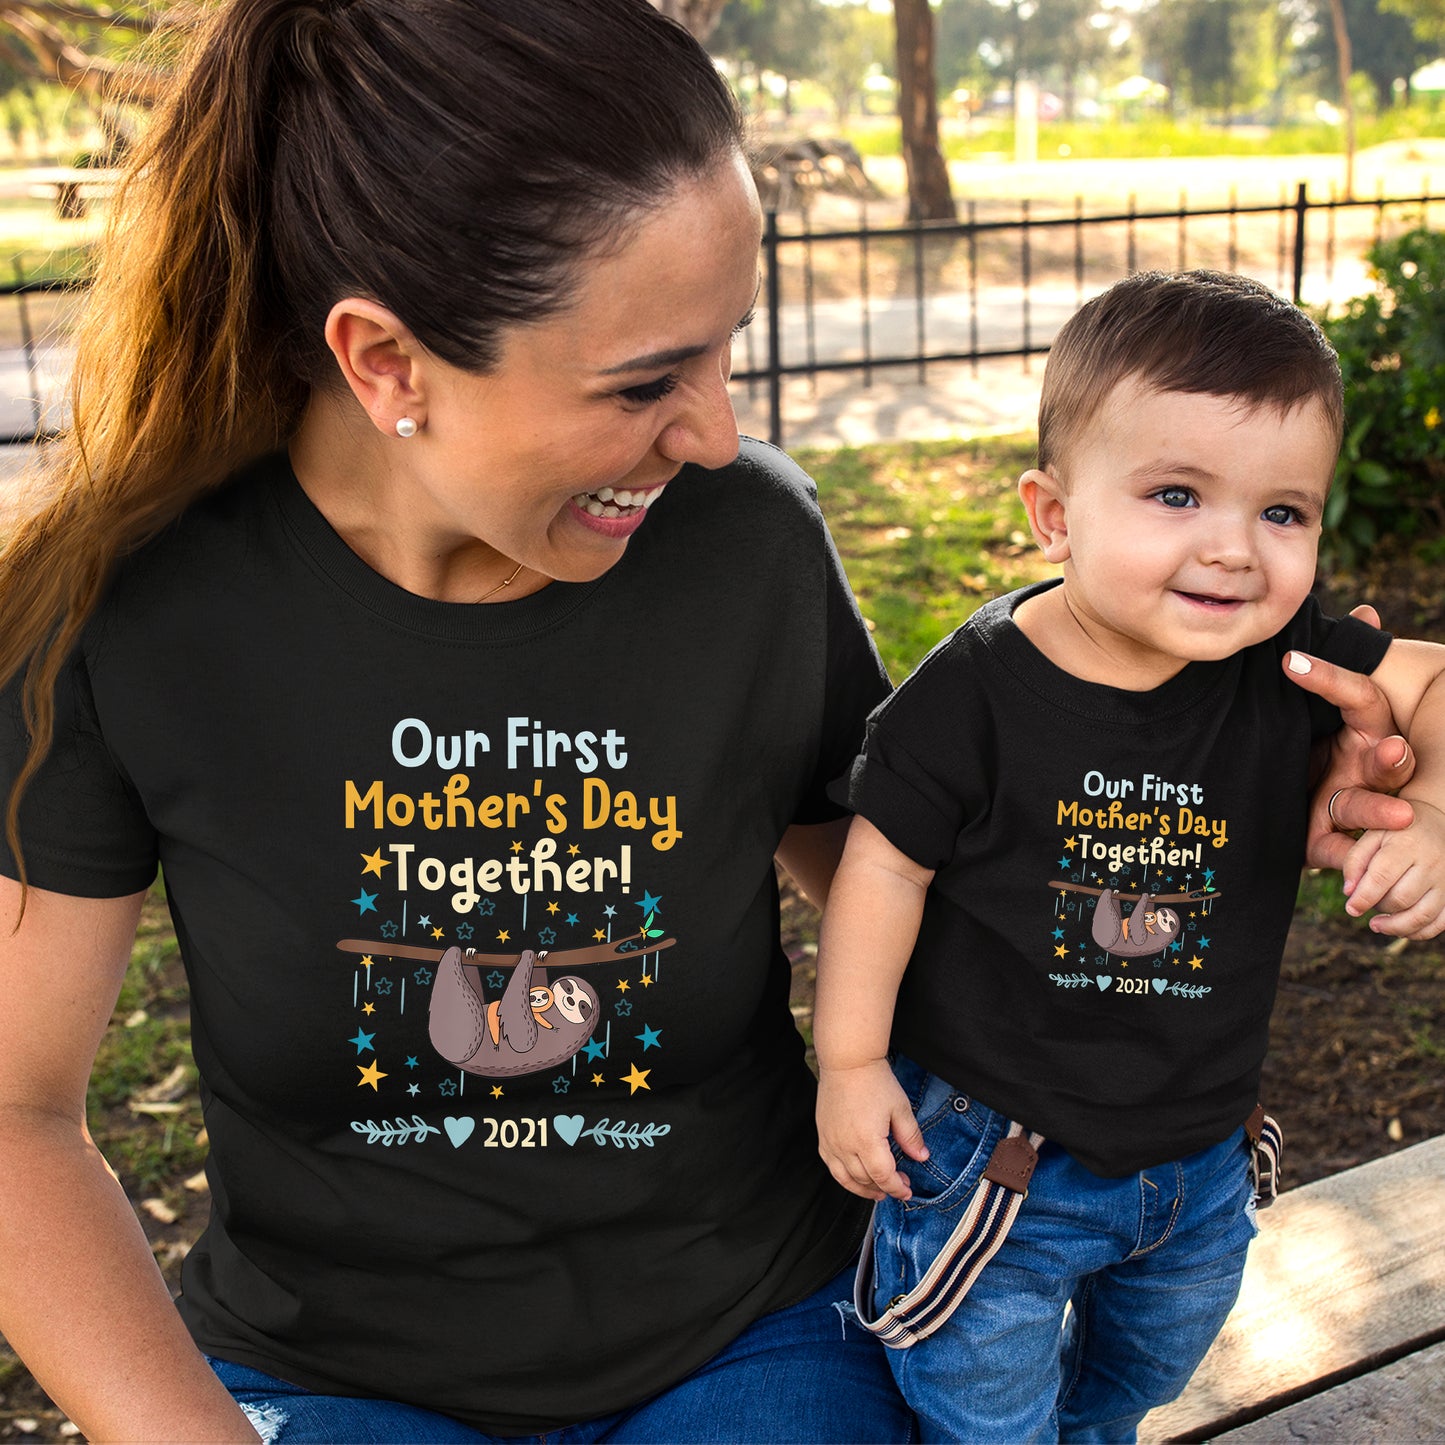 Mother's day My first Mothers Day Shirt For Mom & Baby, Cotton Shirt, Mother Day Gift Ideas, First Mothers Day Baby Girl Outfit